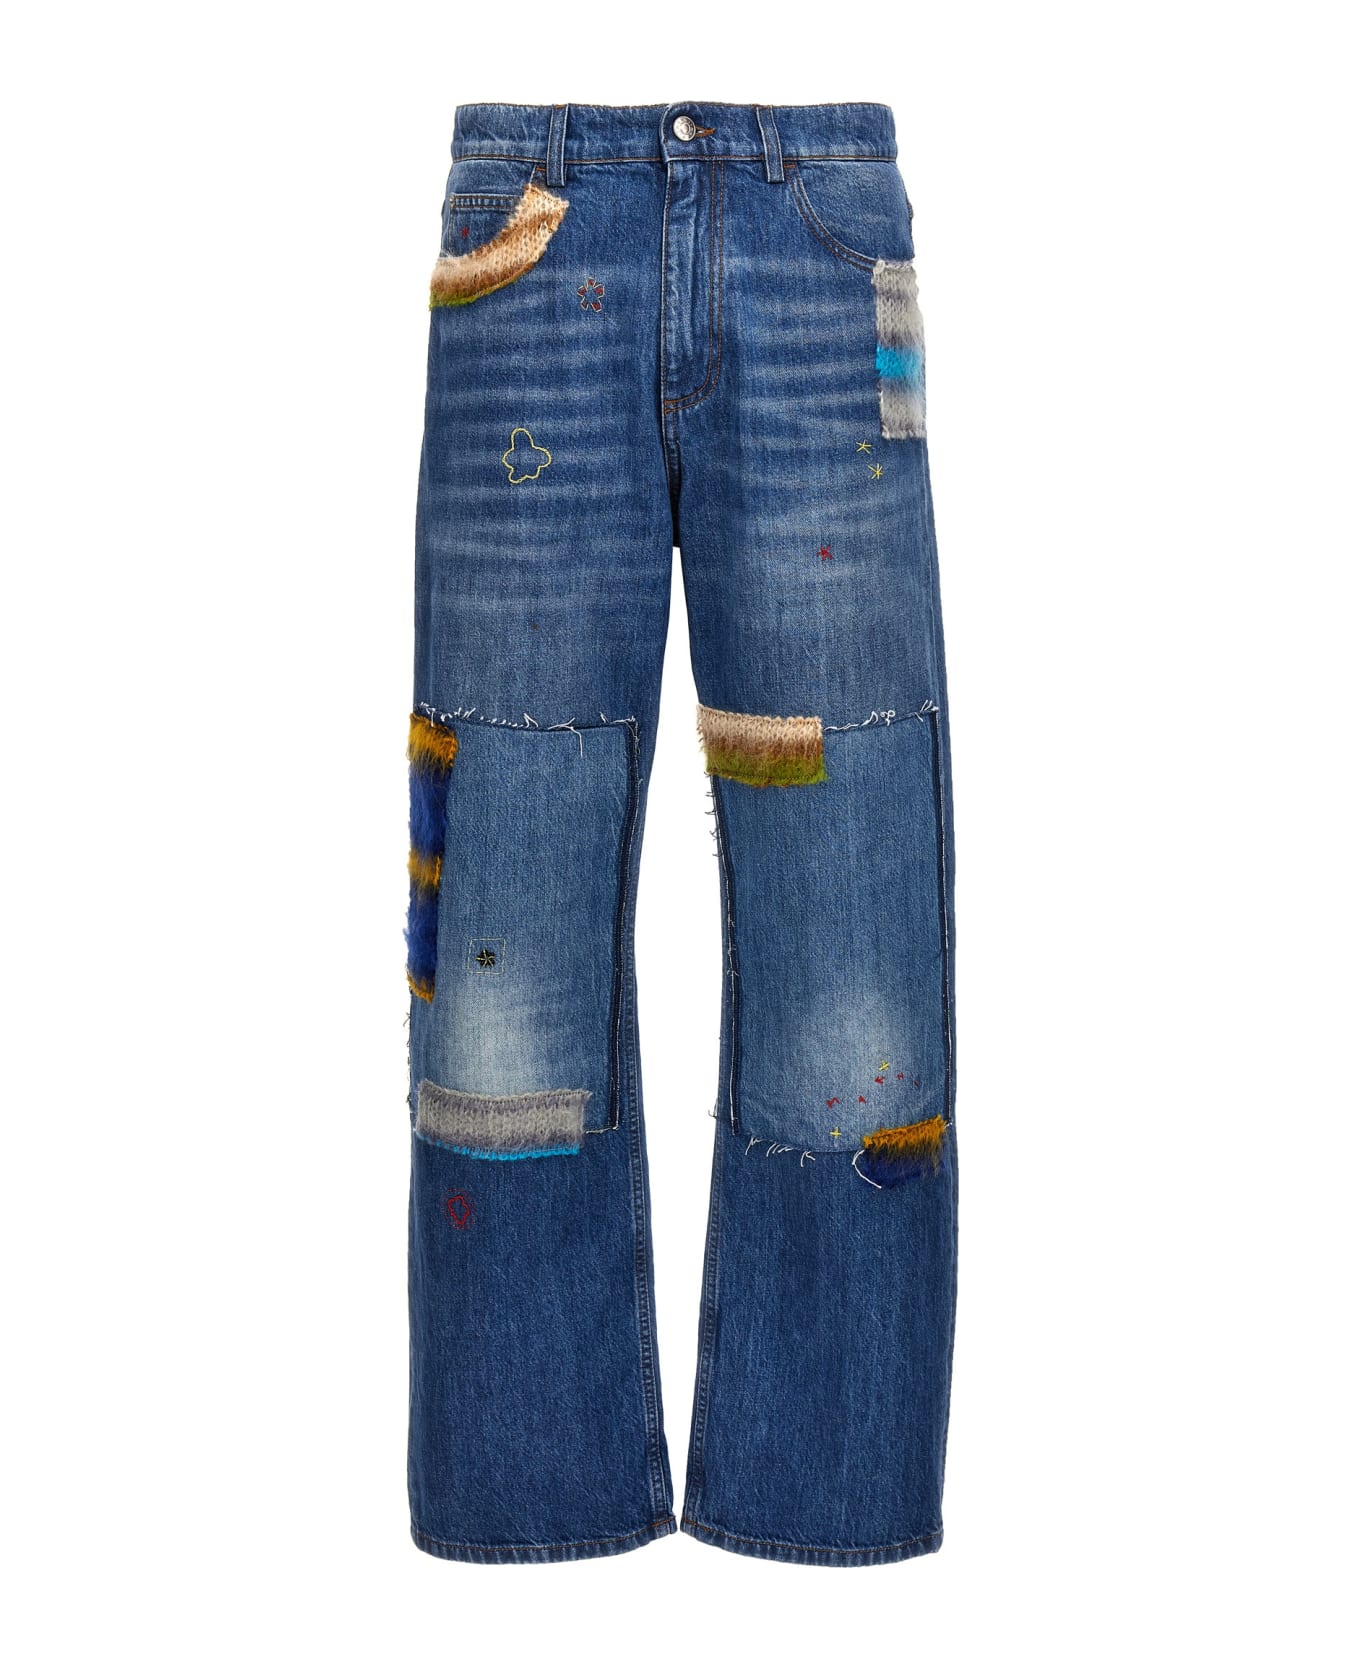 Marni Embroidery Jeans And Patches - Denim デニム